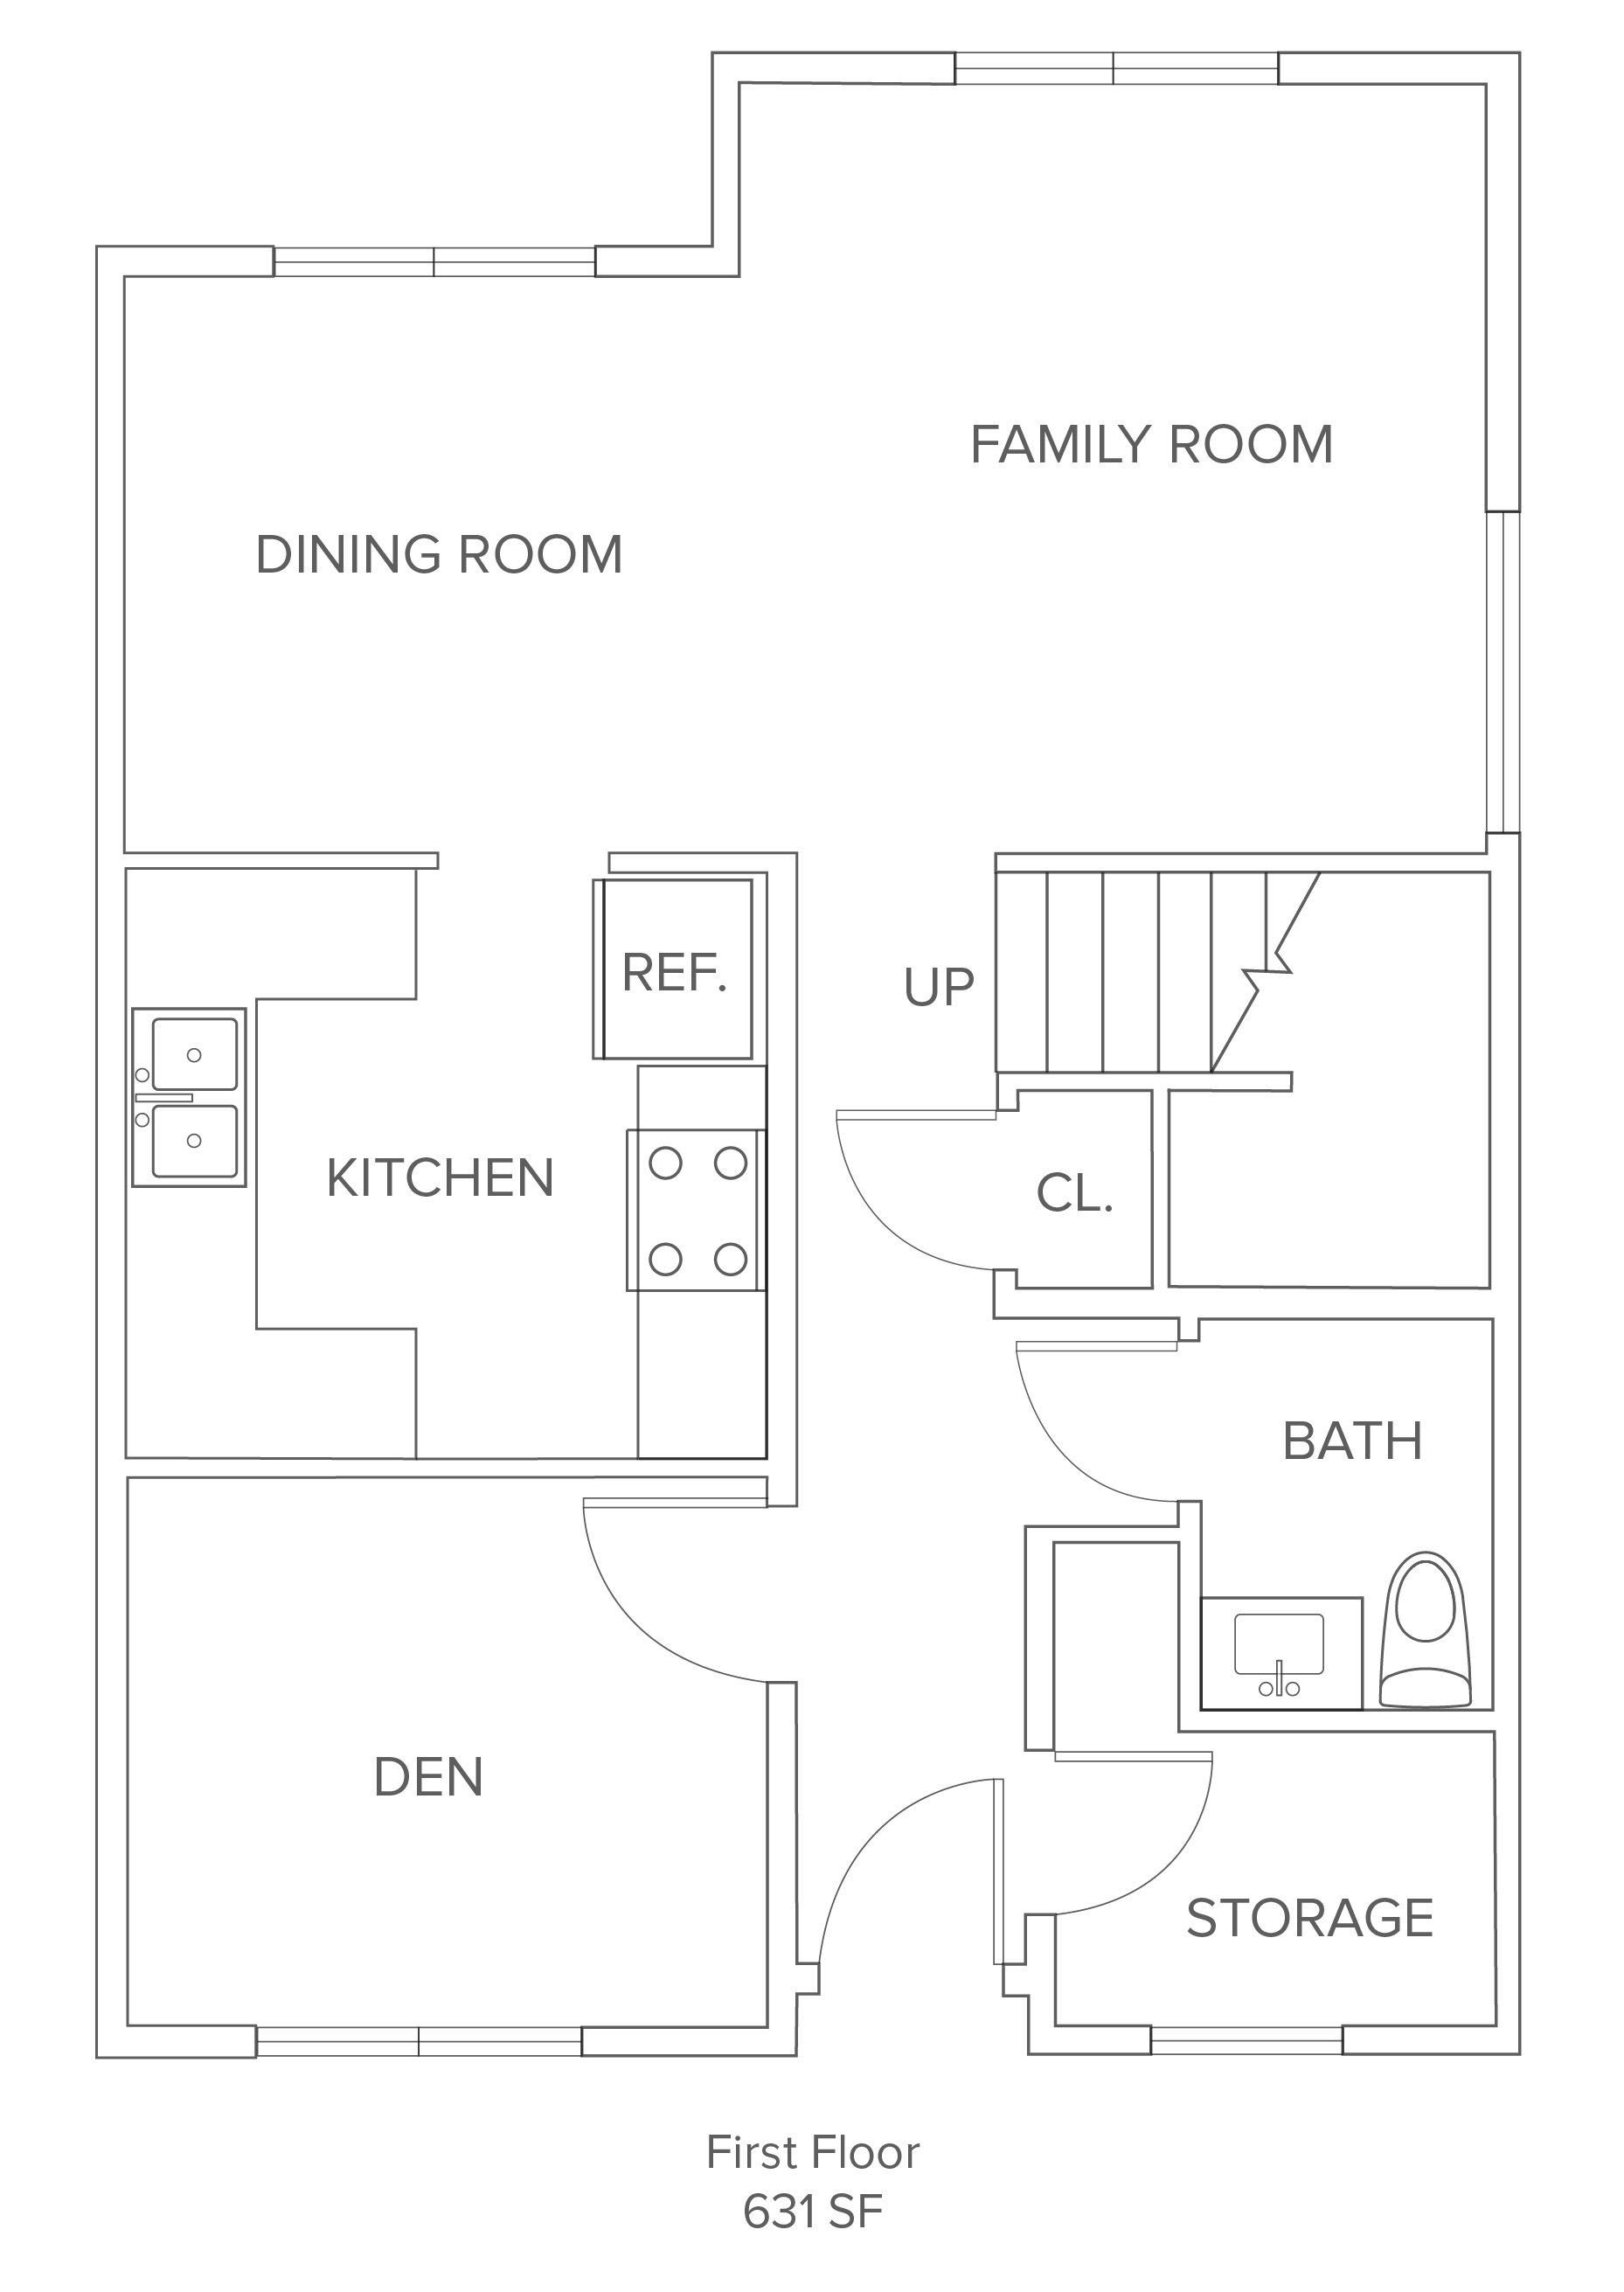 Type A 3BR - V2 - 2021-01-14 - EEM - First Floor.png